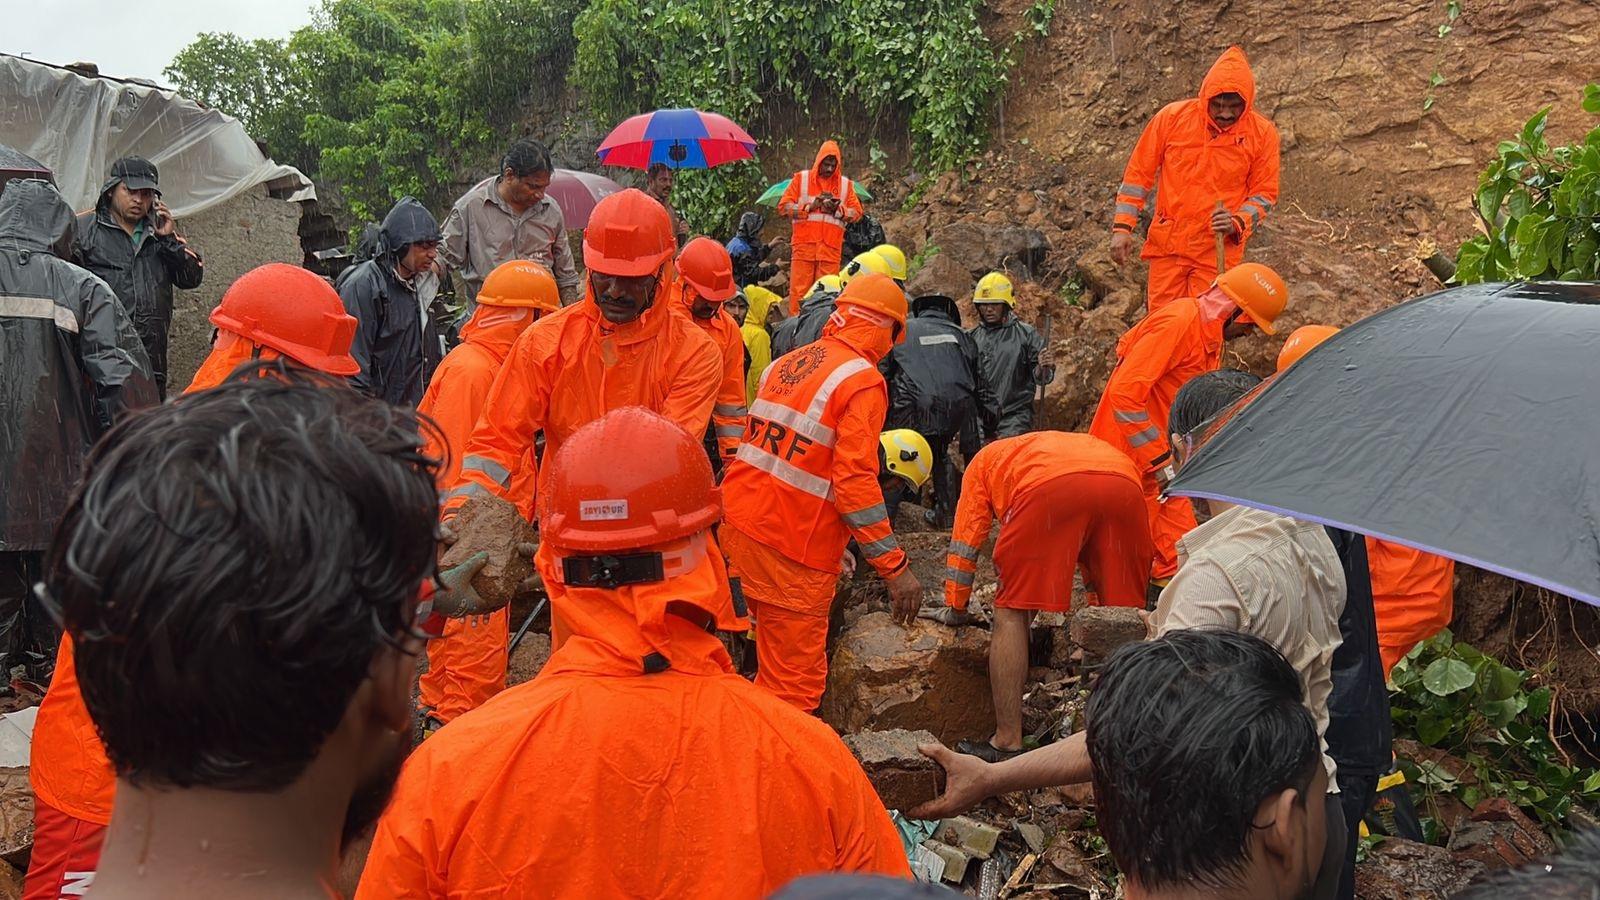 NDRF personnel carry out rescue and relief work after a landslide triggered by heavy rains in Vasai. Pic/Hanif Patel